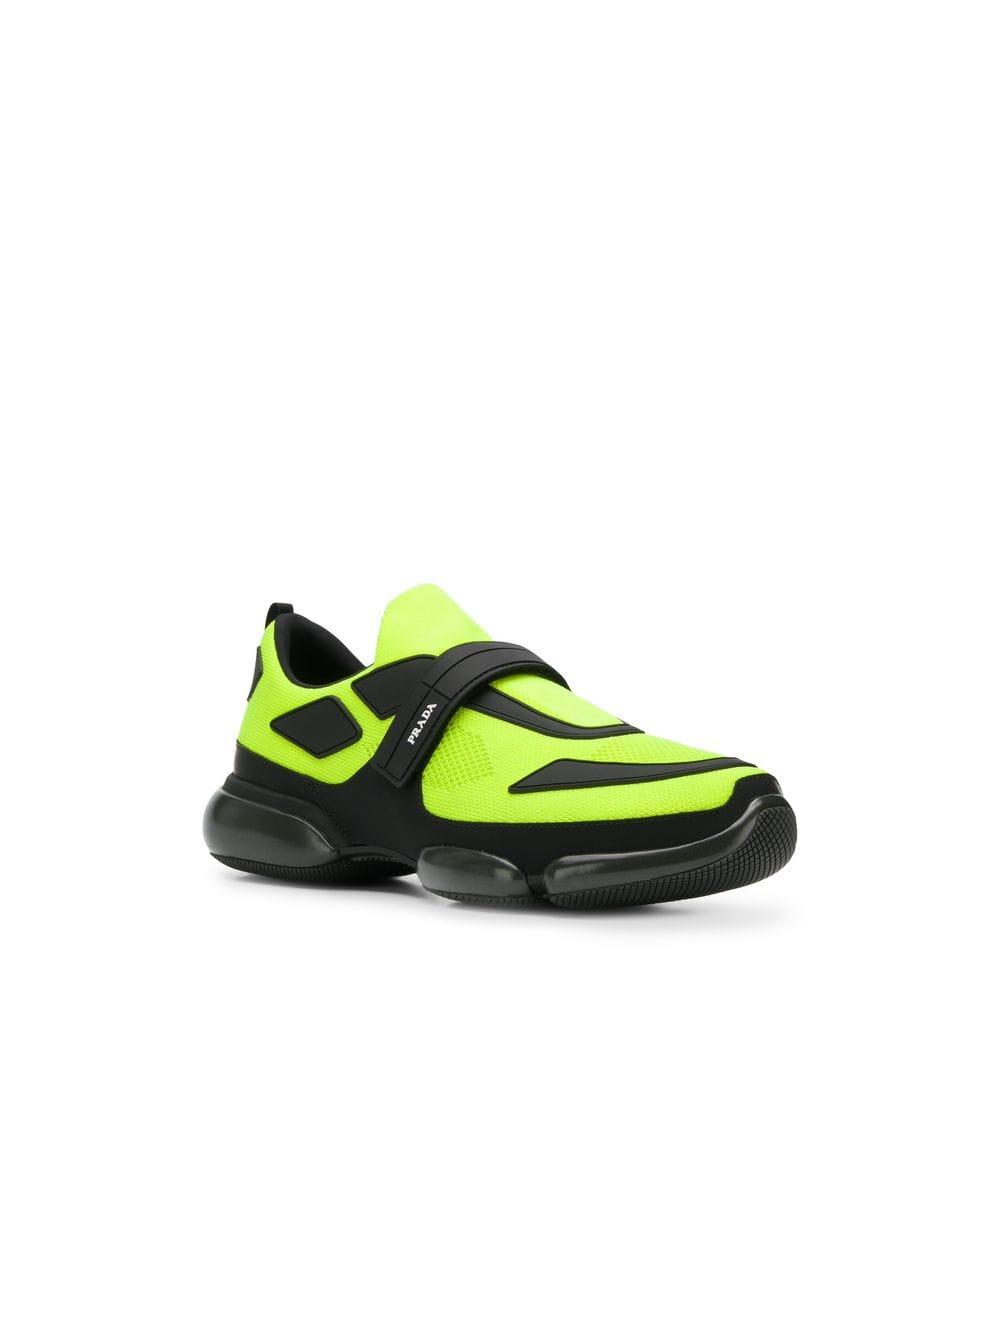 Prada Rubber Yellow Cloudbust Knitted Neon Sneakers for Men | Lyst